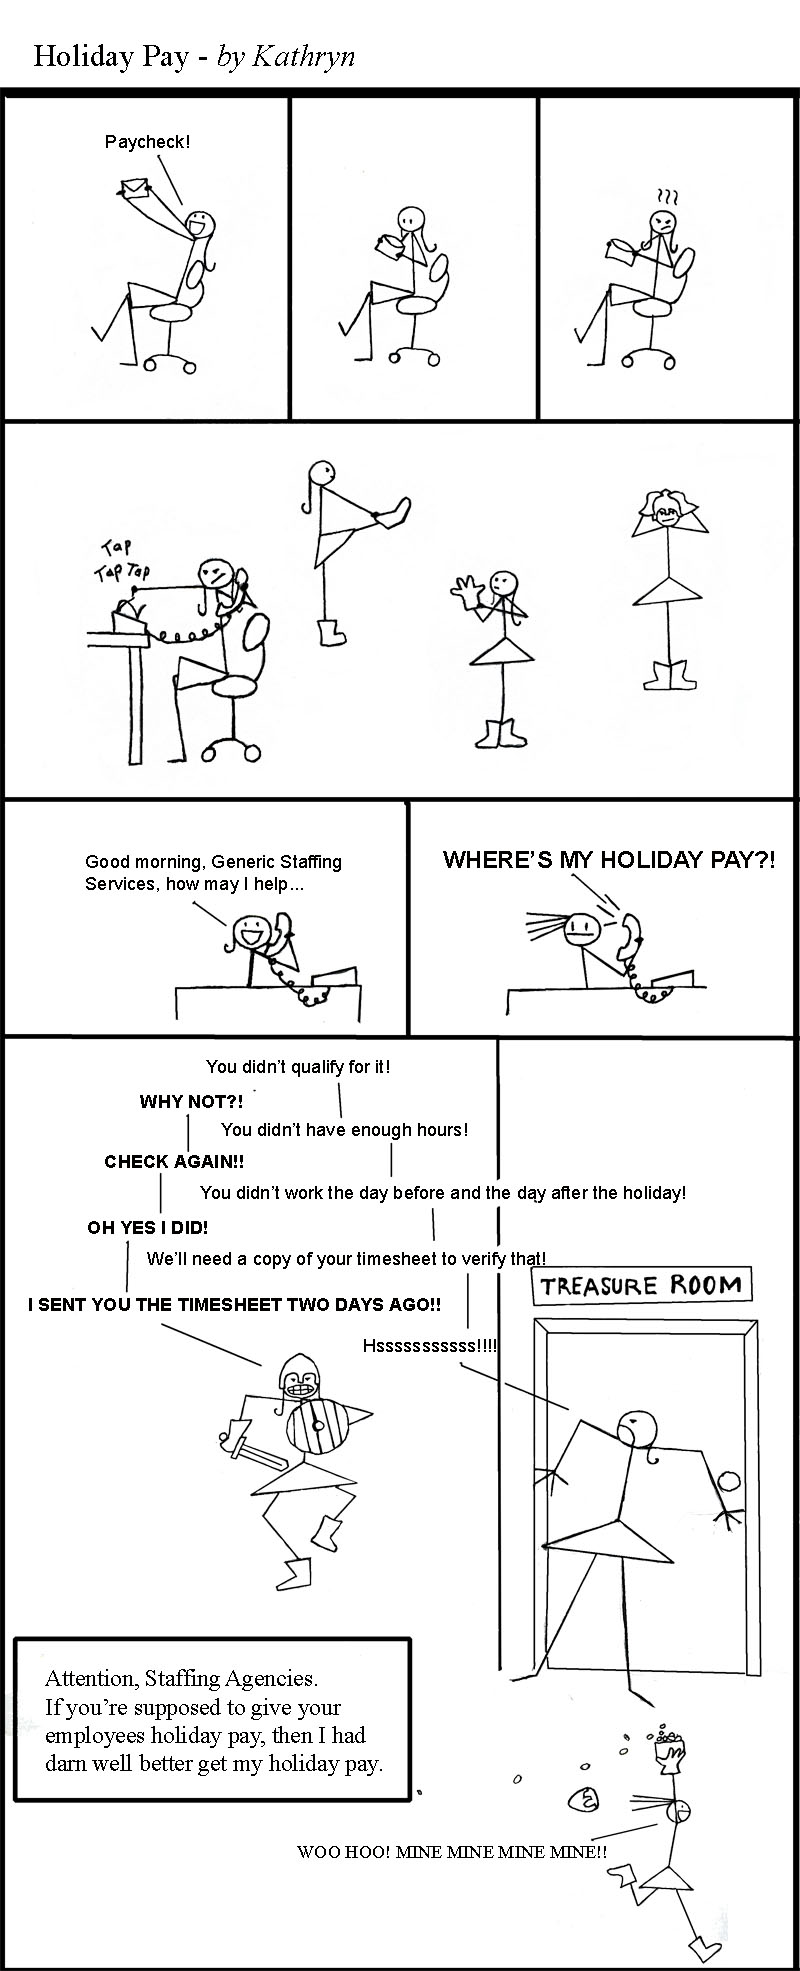 Holiday Pay - by Kathryn